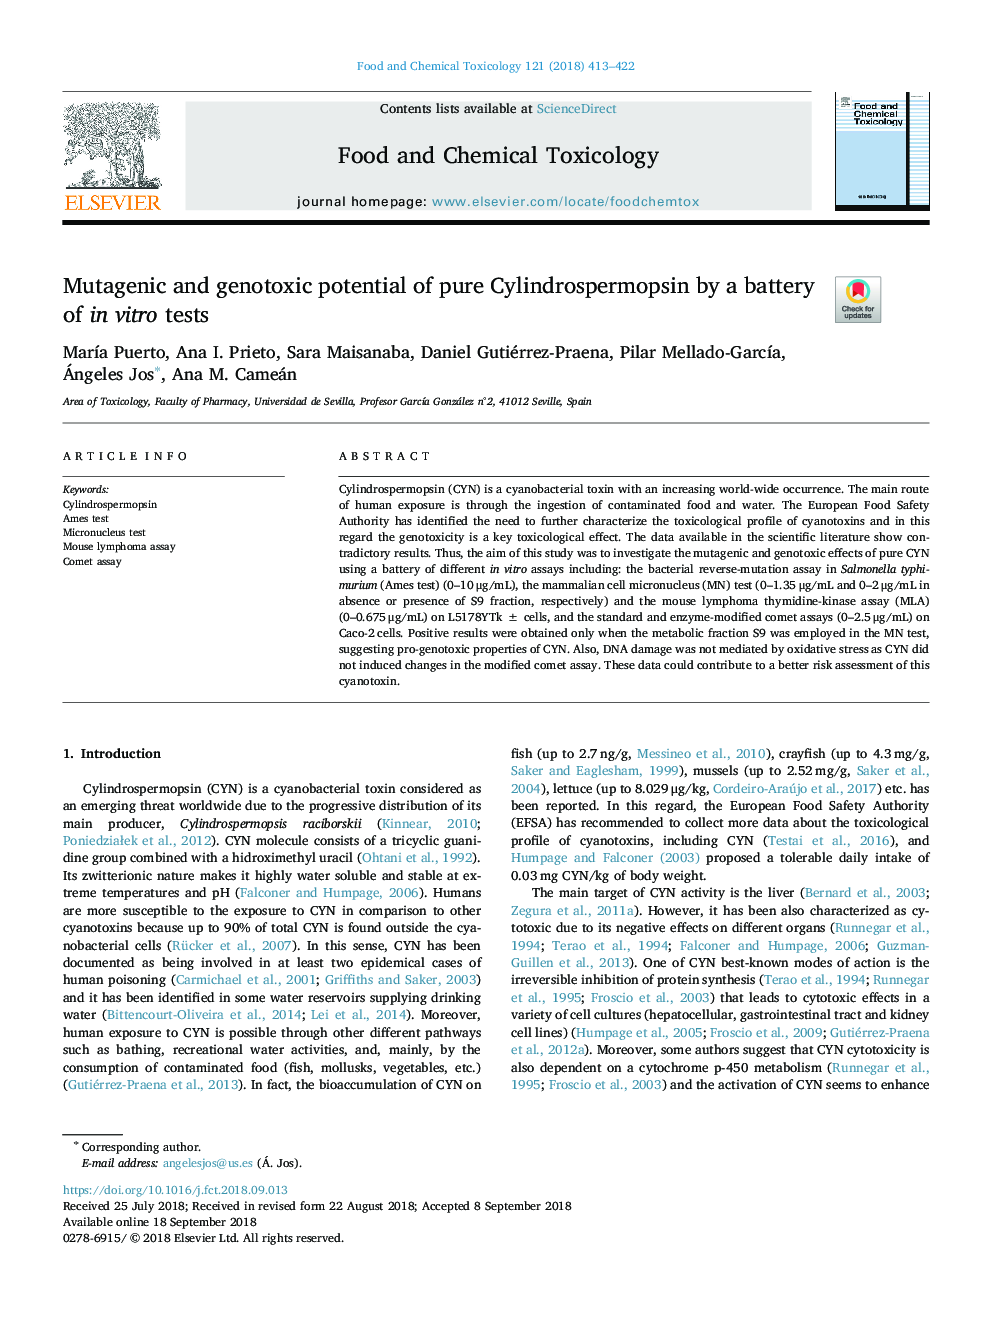 Mutagenic and genotoxic potential of pure Cylindrospermopsin by a battery of in vitro tests